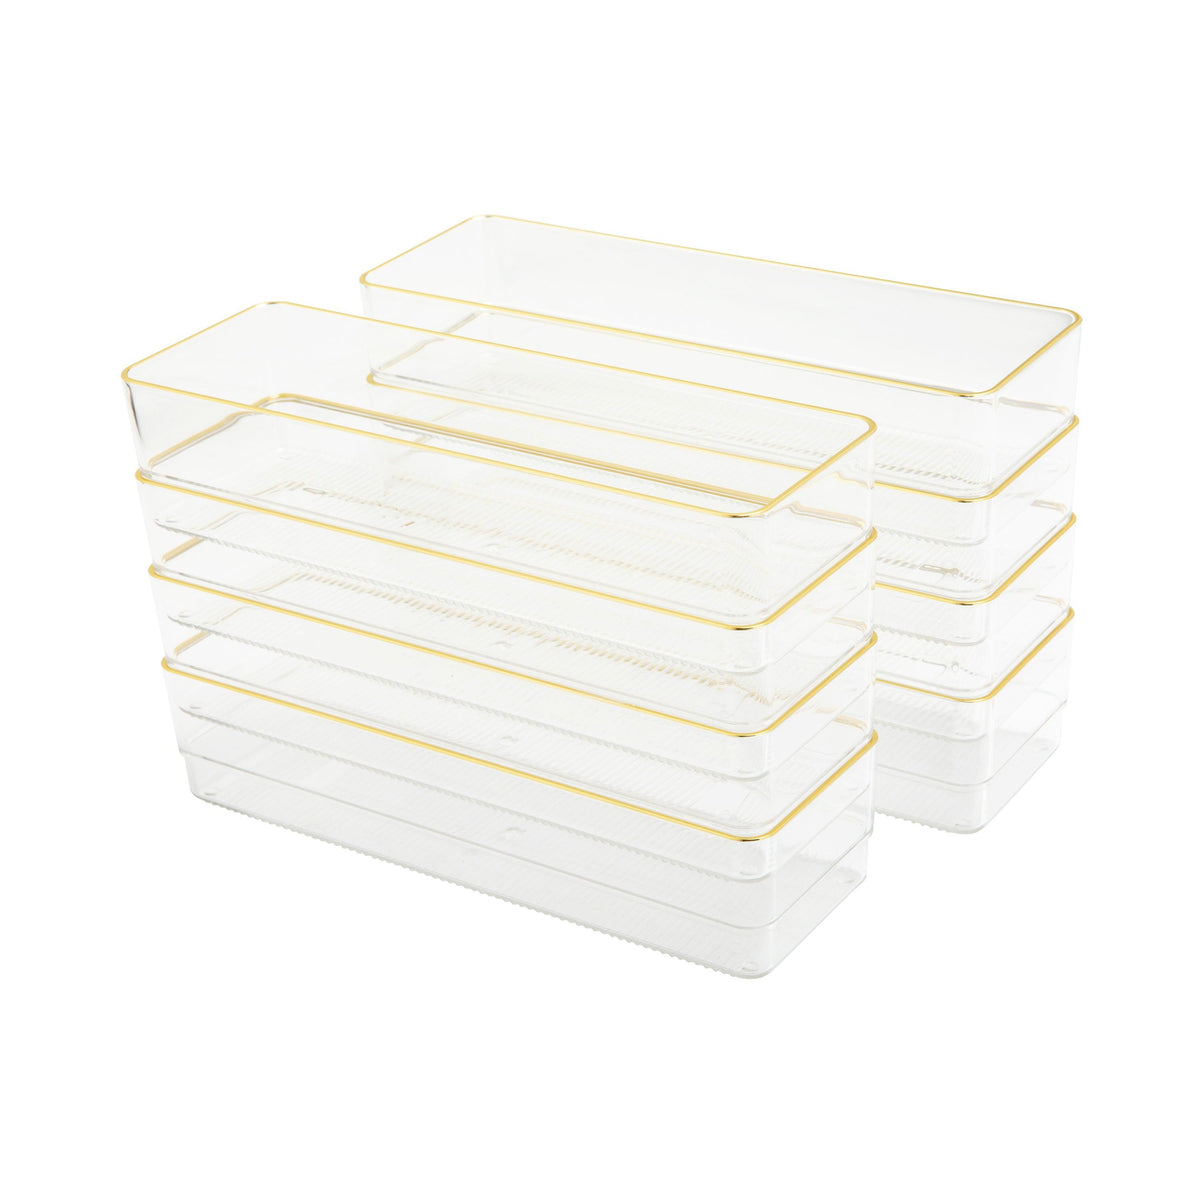 Set of 8 Plastic Stacking Desk Drawer Organizers with Gold Trim - 9 x 3